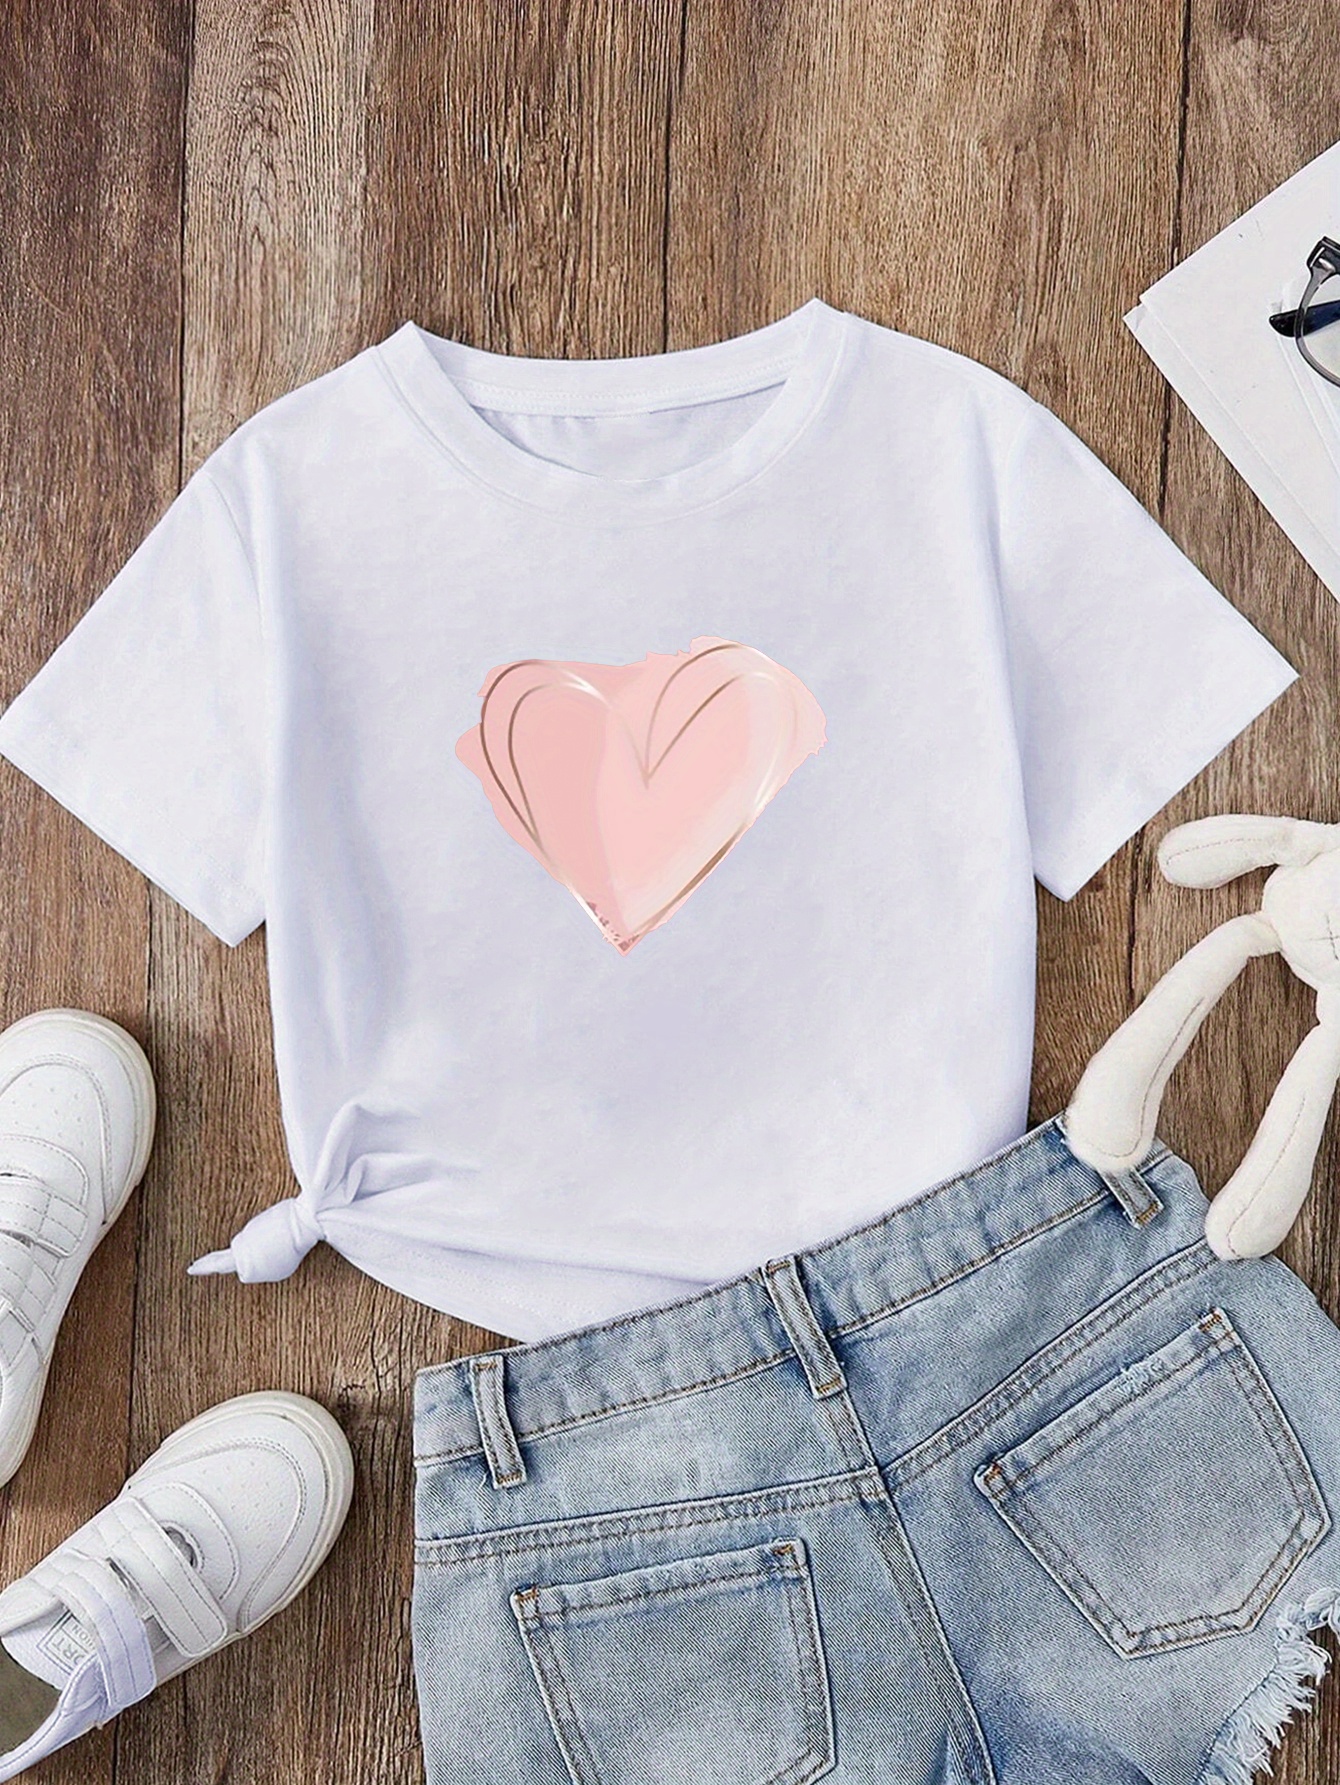 Cute Cotton Tops For Jeans, Ladies Cotton Tops